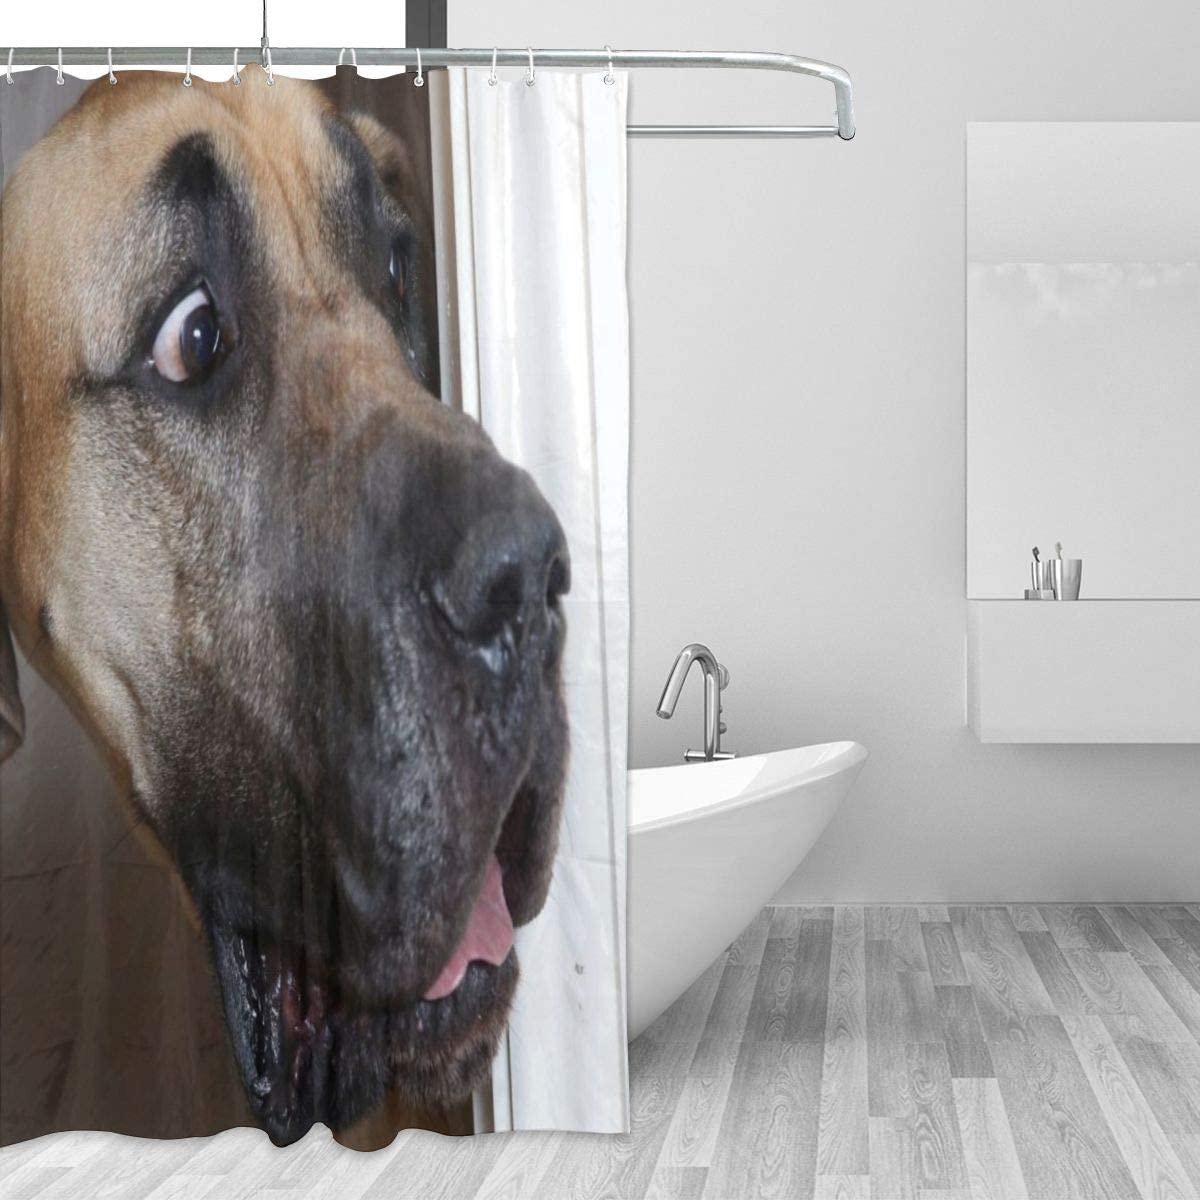 Animal Great Dane Dogs Funny Shower Curtain Astonished Labrador Staring At Your Naked Body Bathroom Curtain Decor With 12 Hooks